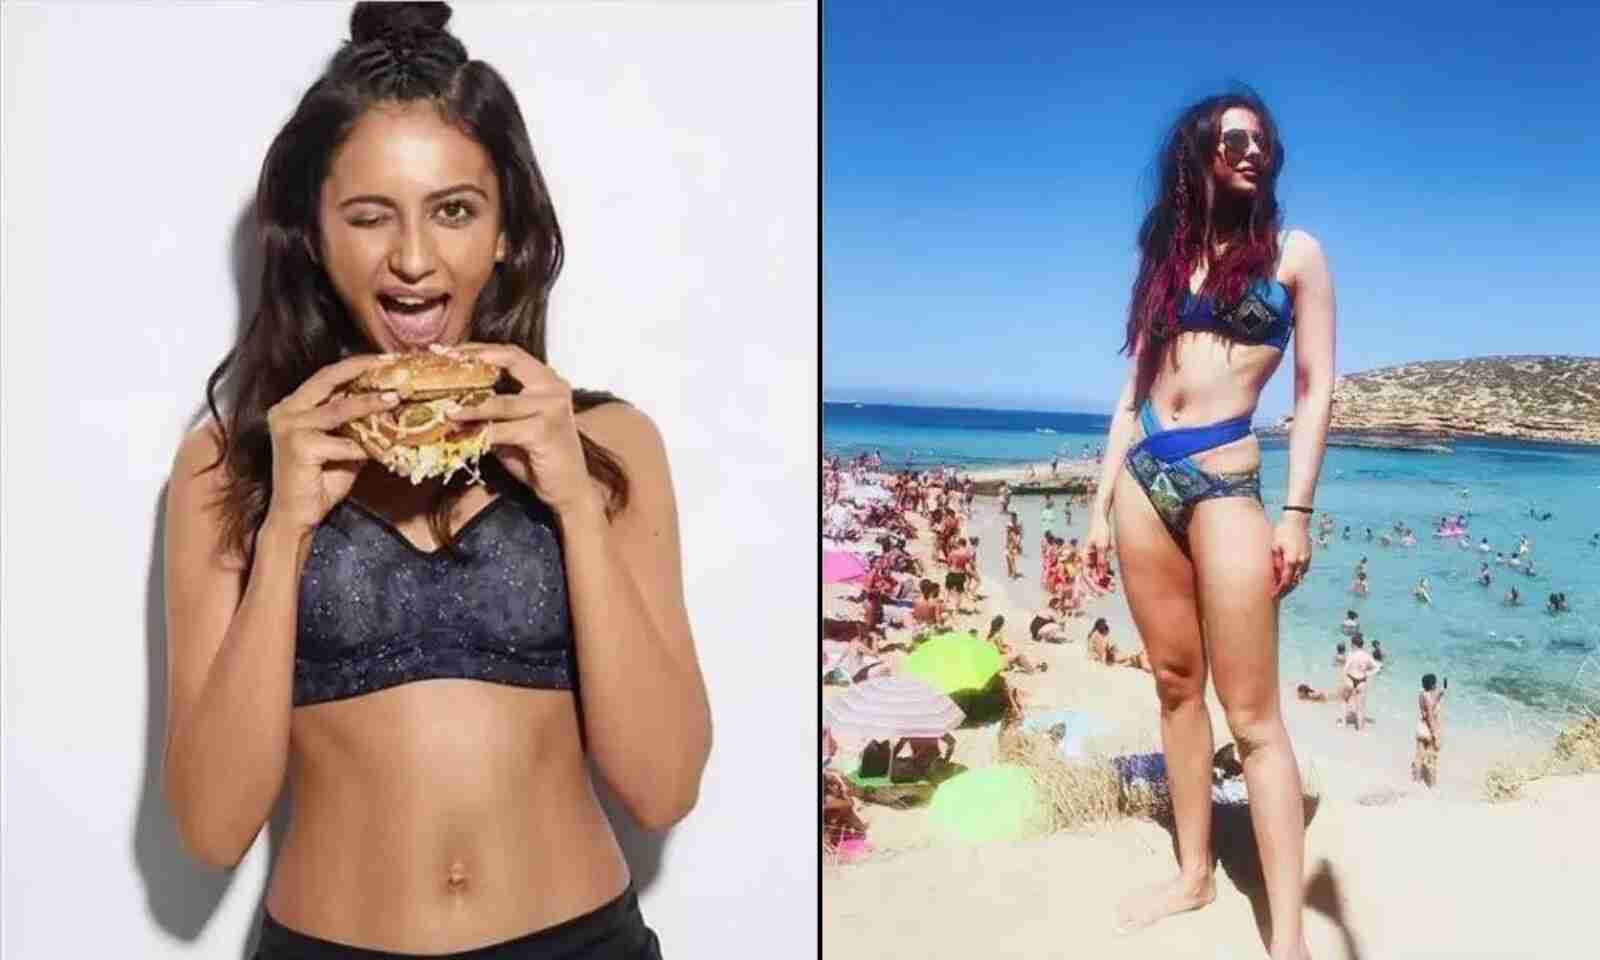 Rakul Preetsex - Sexy? Well, she already knows it! Rakul Preet Singh's pictures have set the  internet on fire